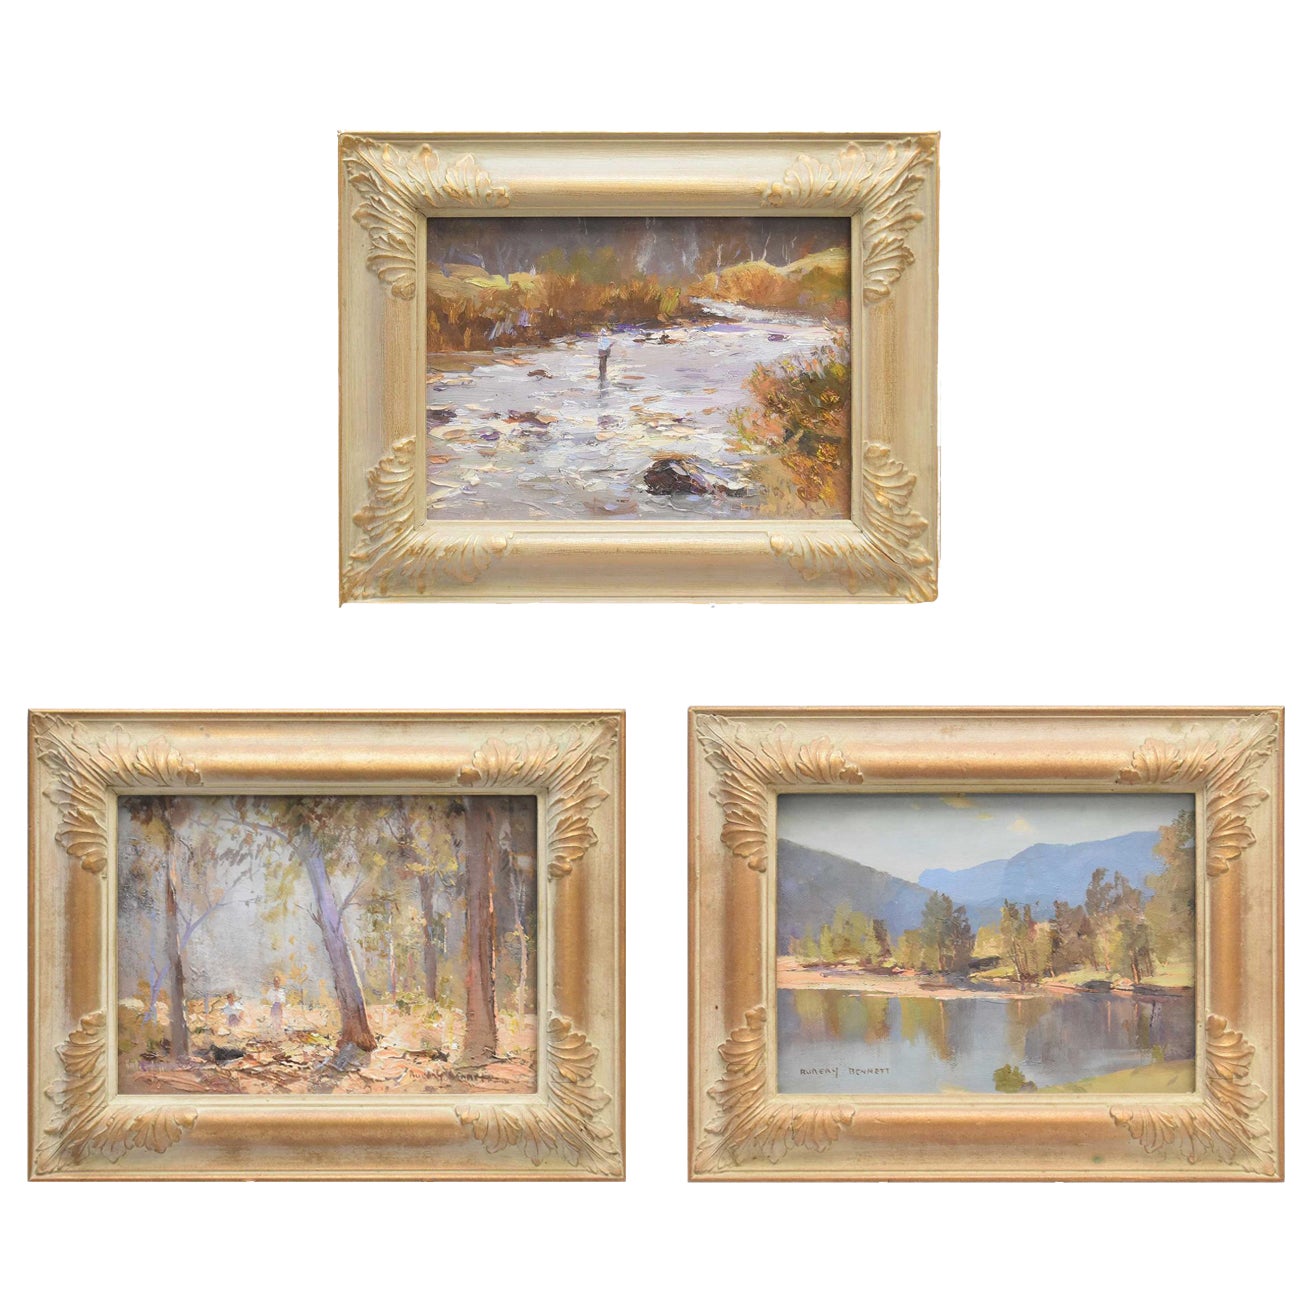 William Rubery Bennett 'Australian' Set of Three Oil Paintings on Board, 20th C For Sale